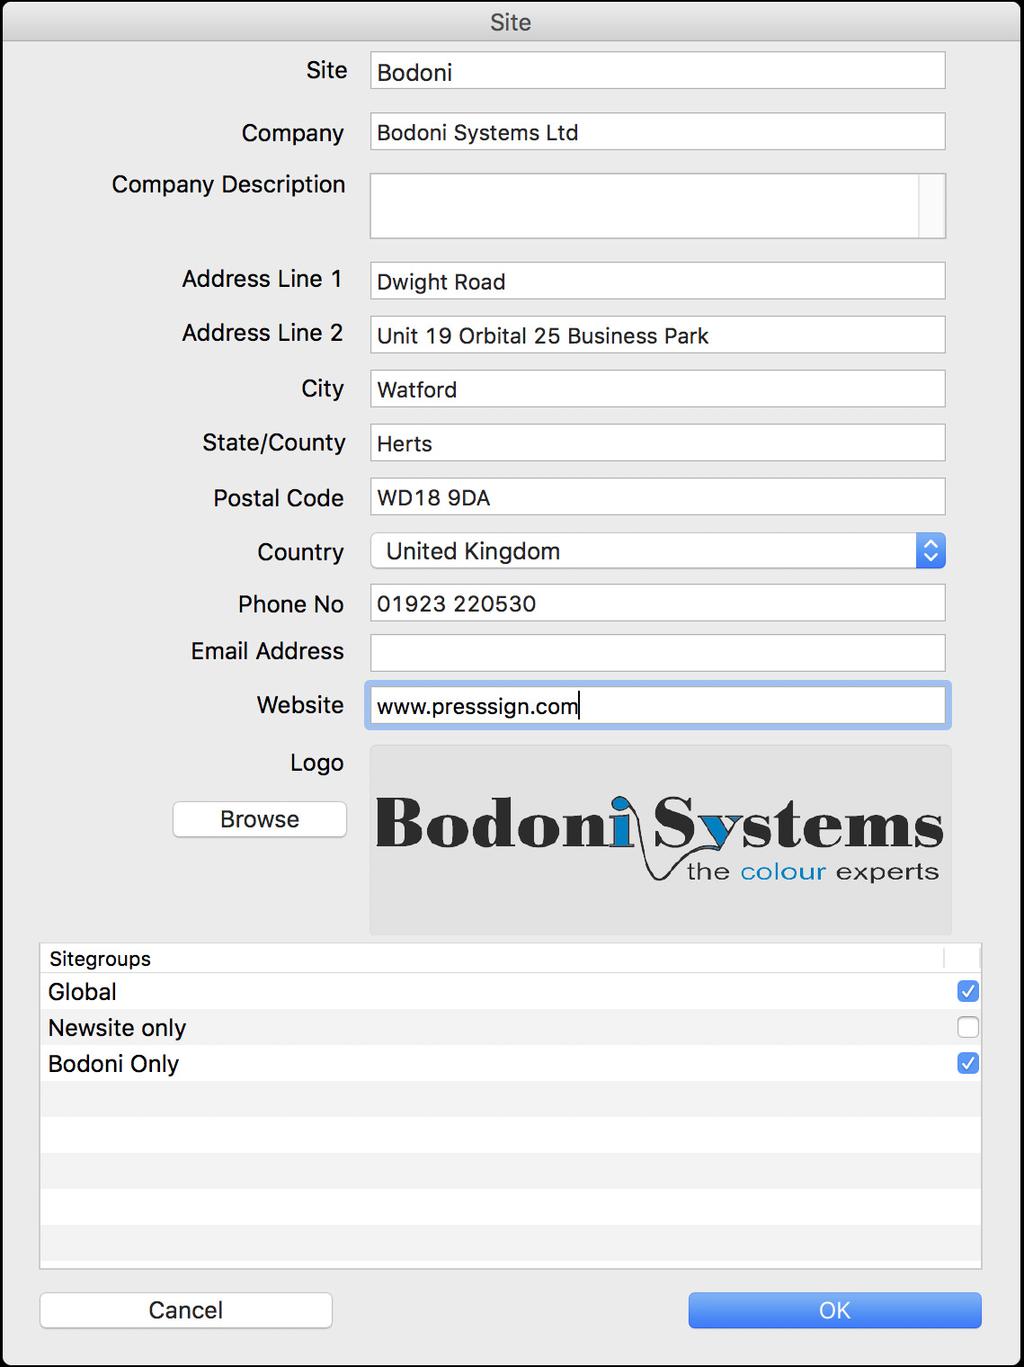 Set Image for PDF reports New installations will be able to add a logo to the site settings and this logo will appear in the top right hand corner of the